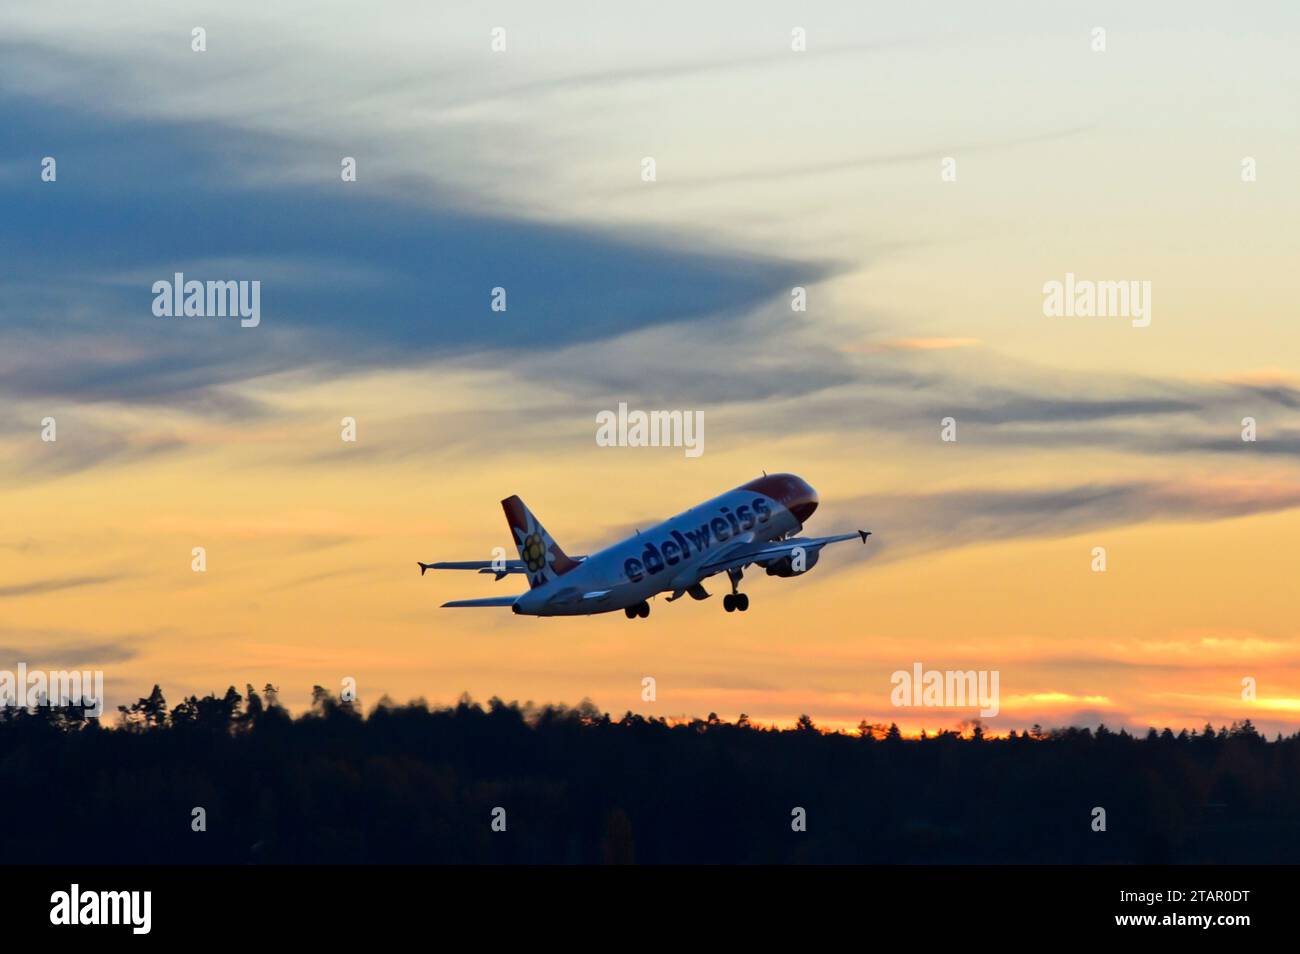 Airbus of the airline Edelweiss Air after take-off climbing into the evening sky, Zurich Airport, Zurich, Switzerland Stock Photo